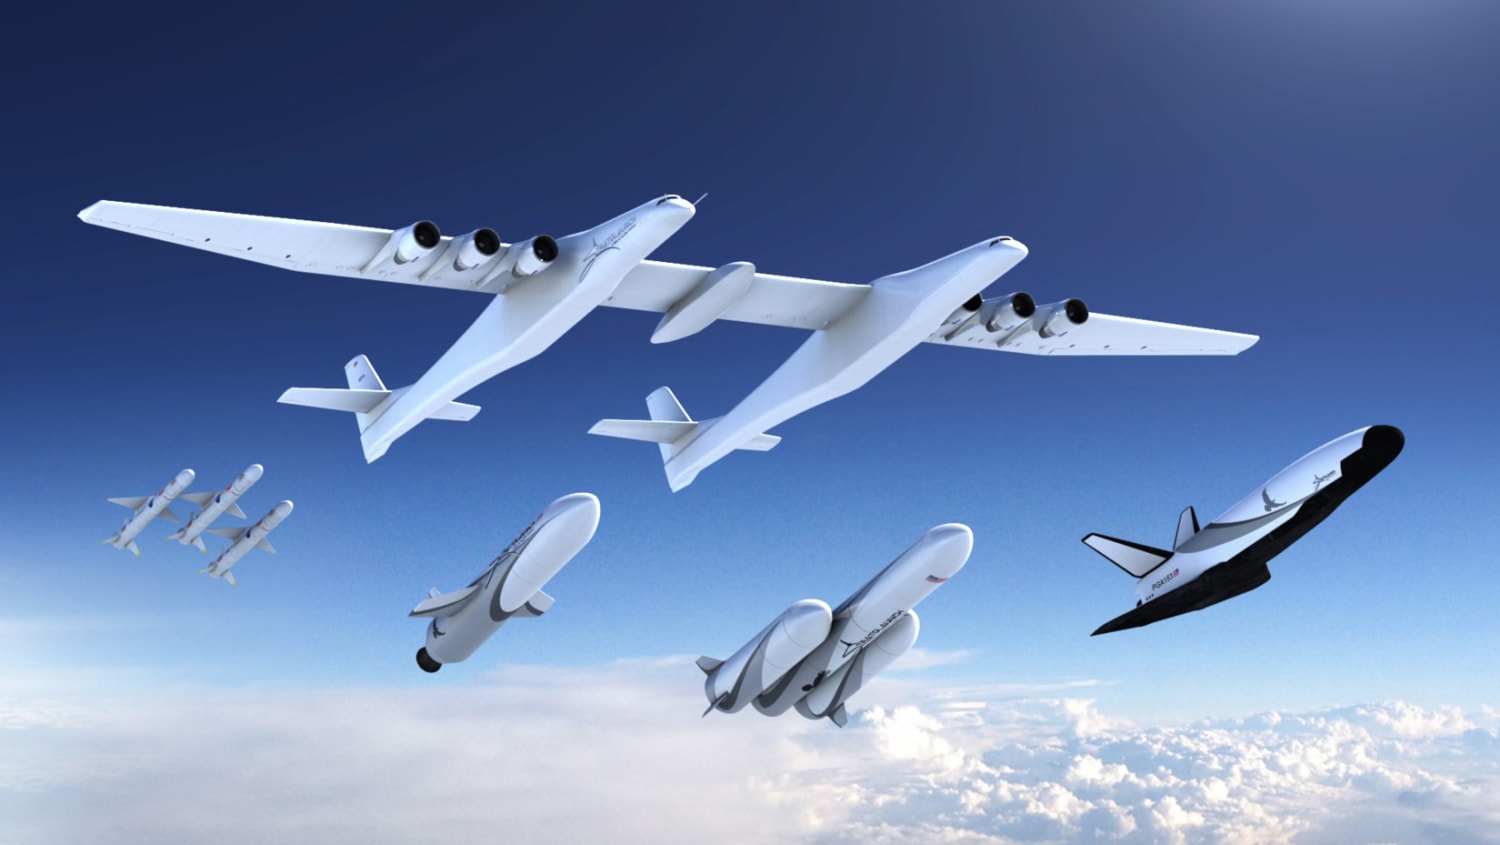 Billionaire readies world's largest plane to launch rockets into space